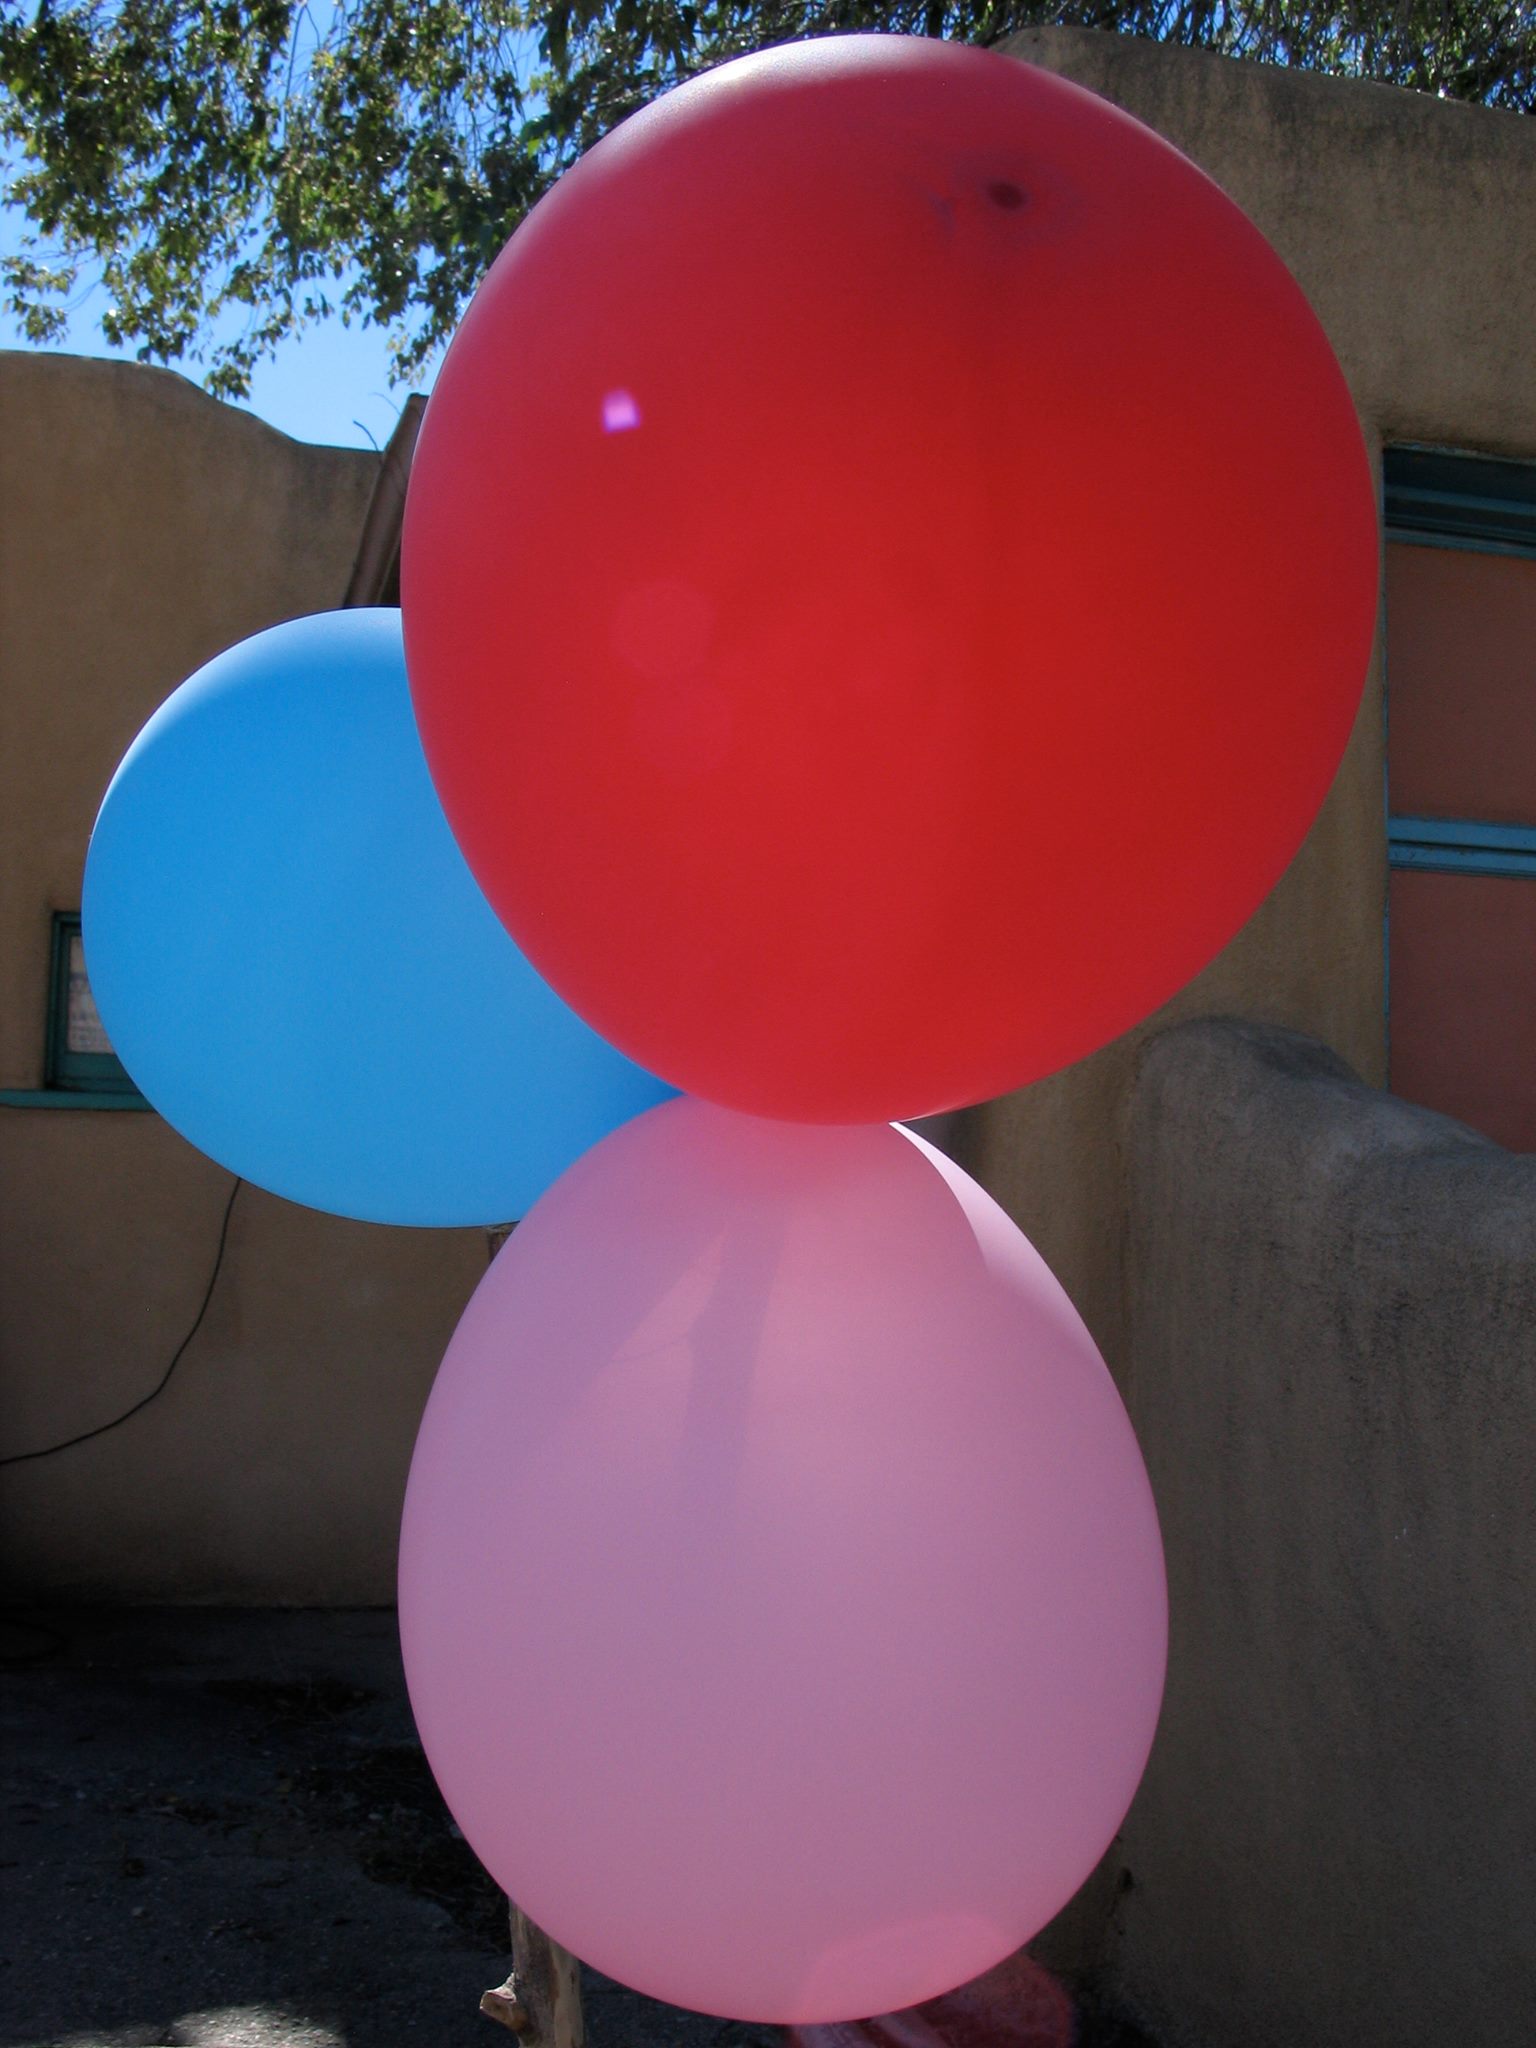 three balloons in blue, red and pink